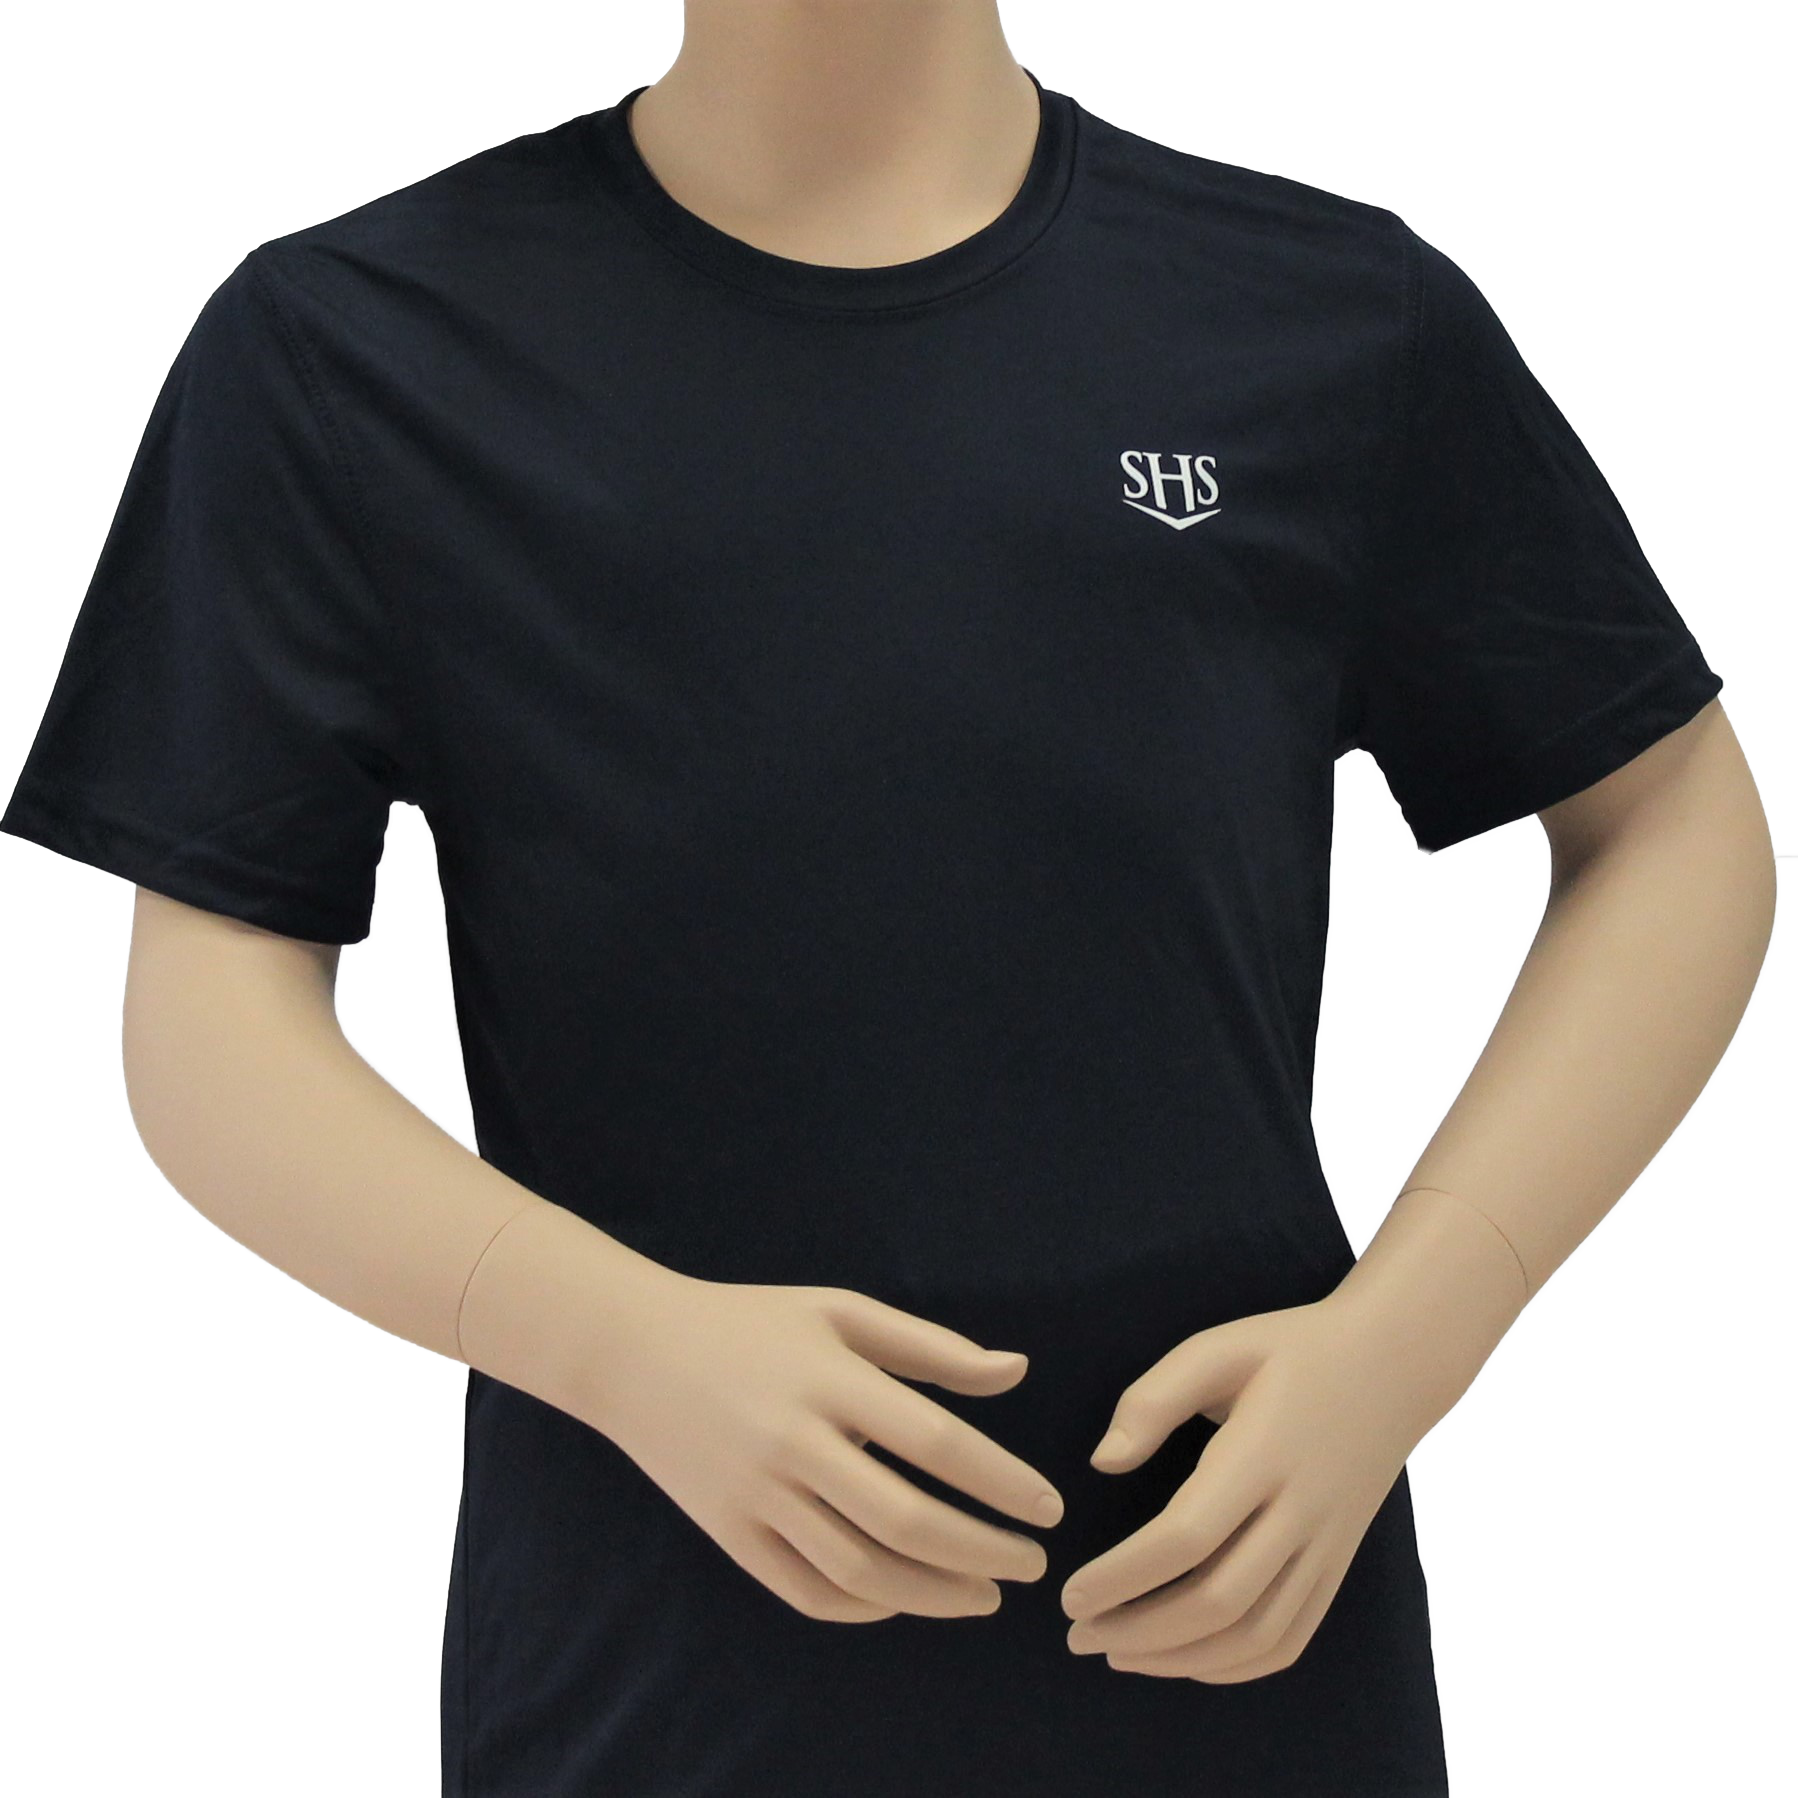 Navy Crested Short Sleeve Dry-Fit Gym Shirt